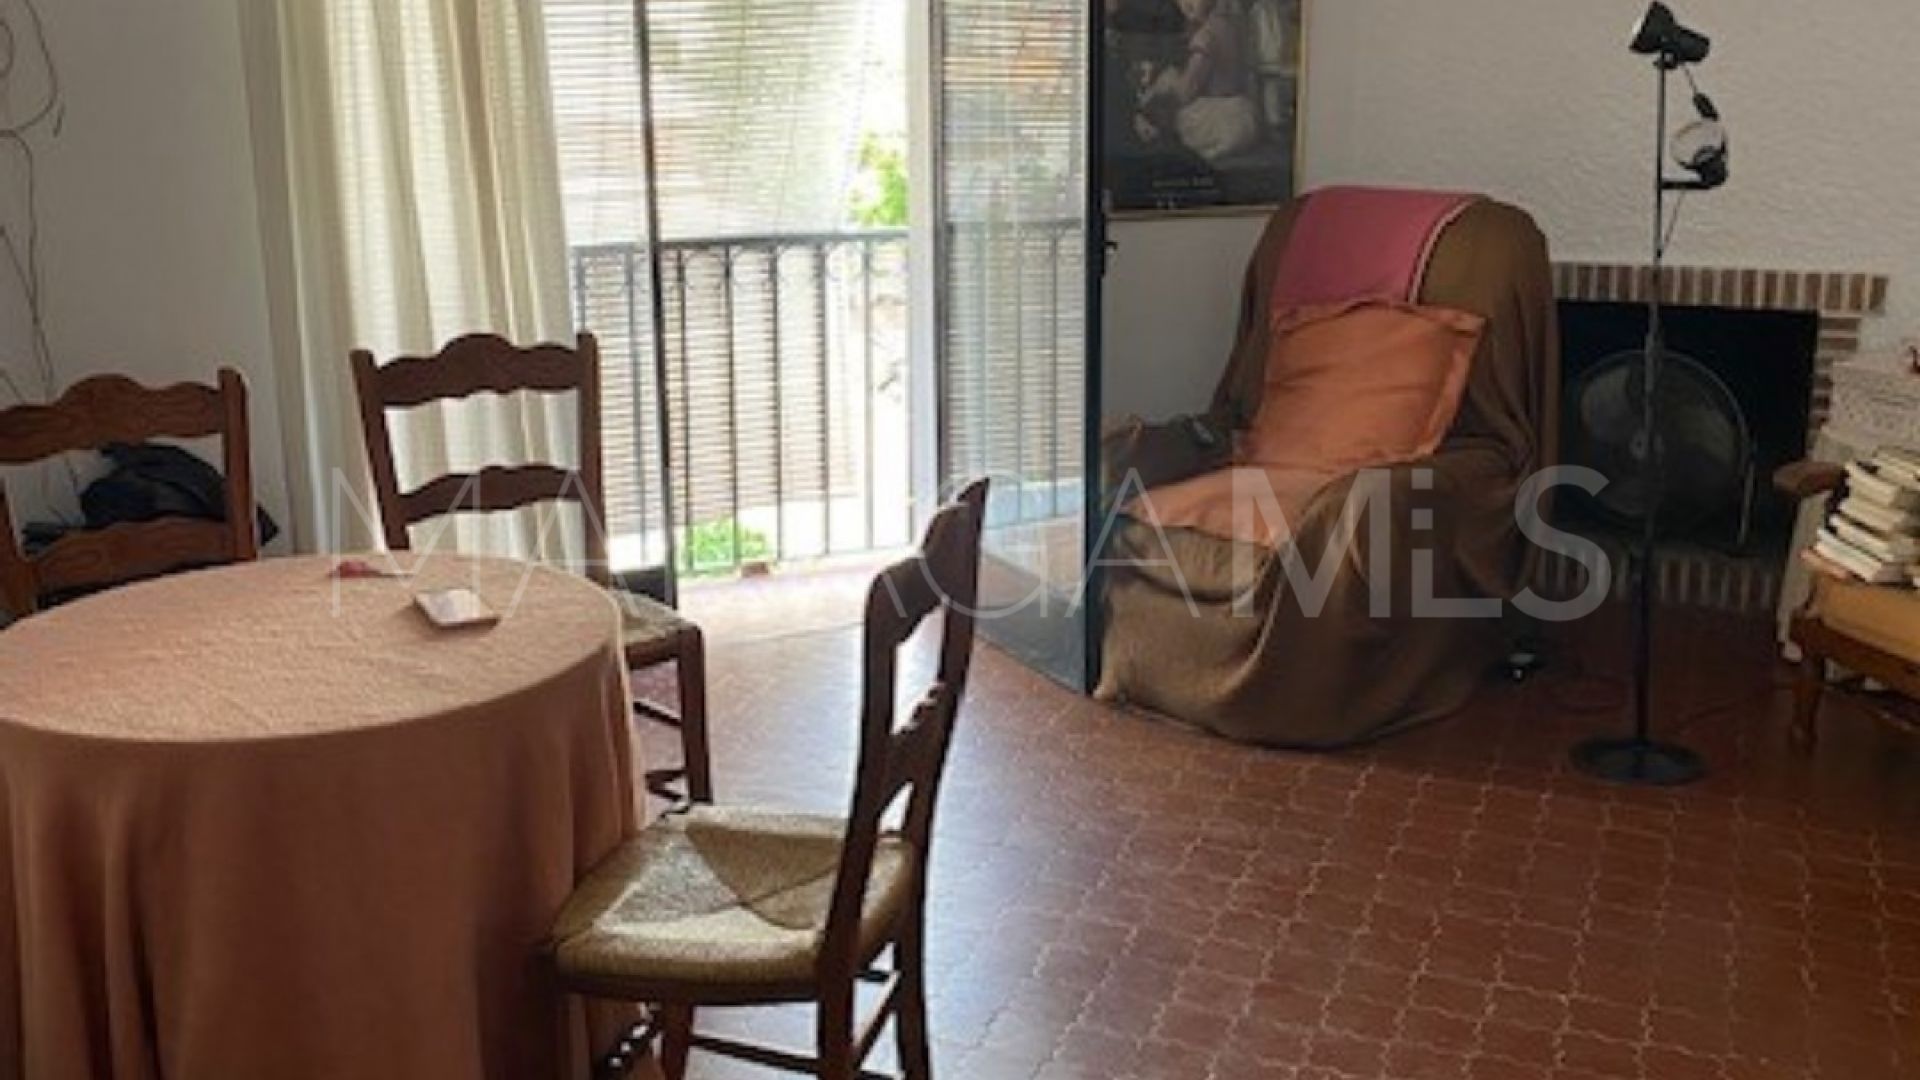 For sale Casco antiguo 4 bedrooms house